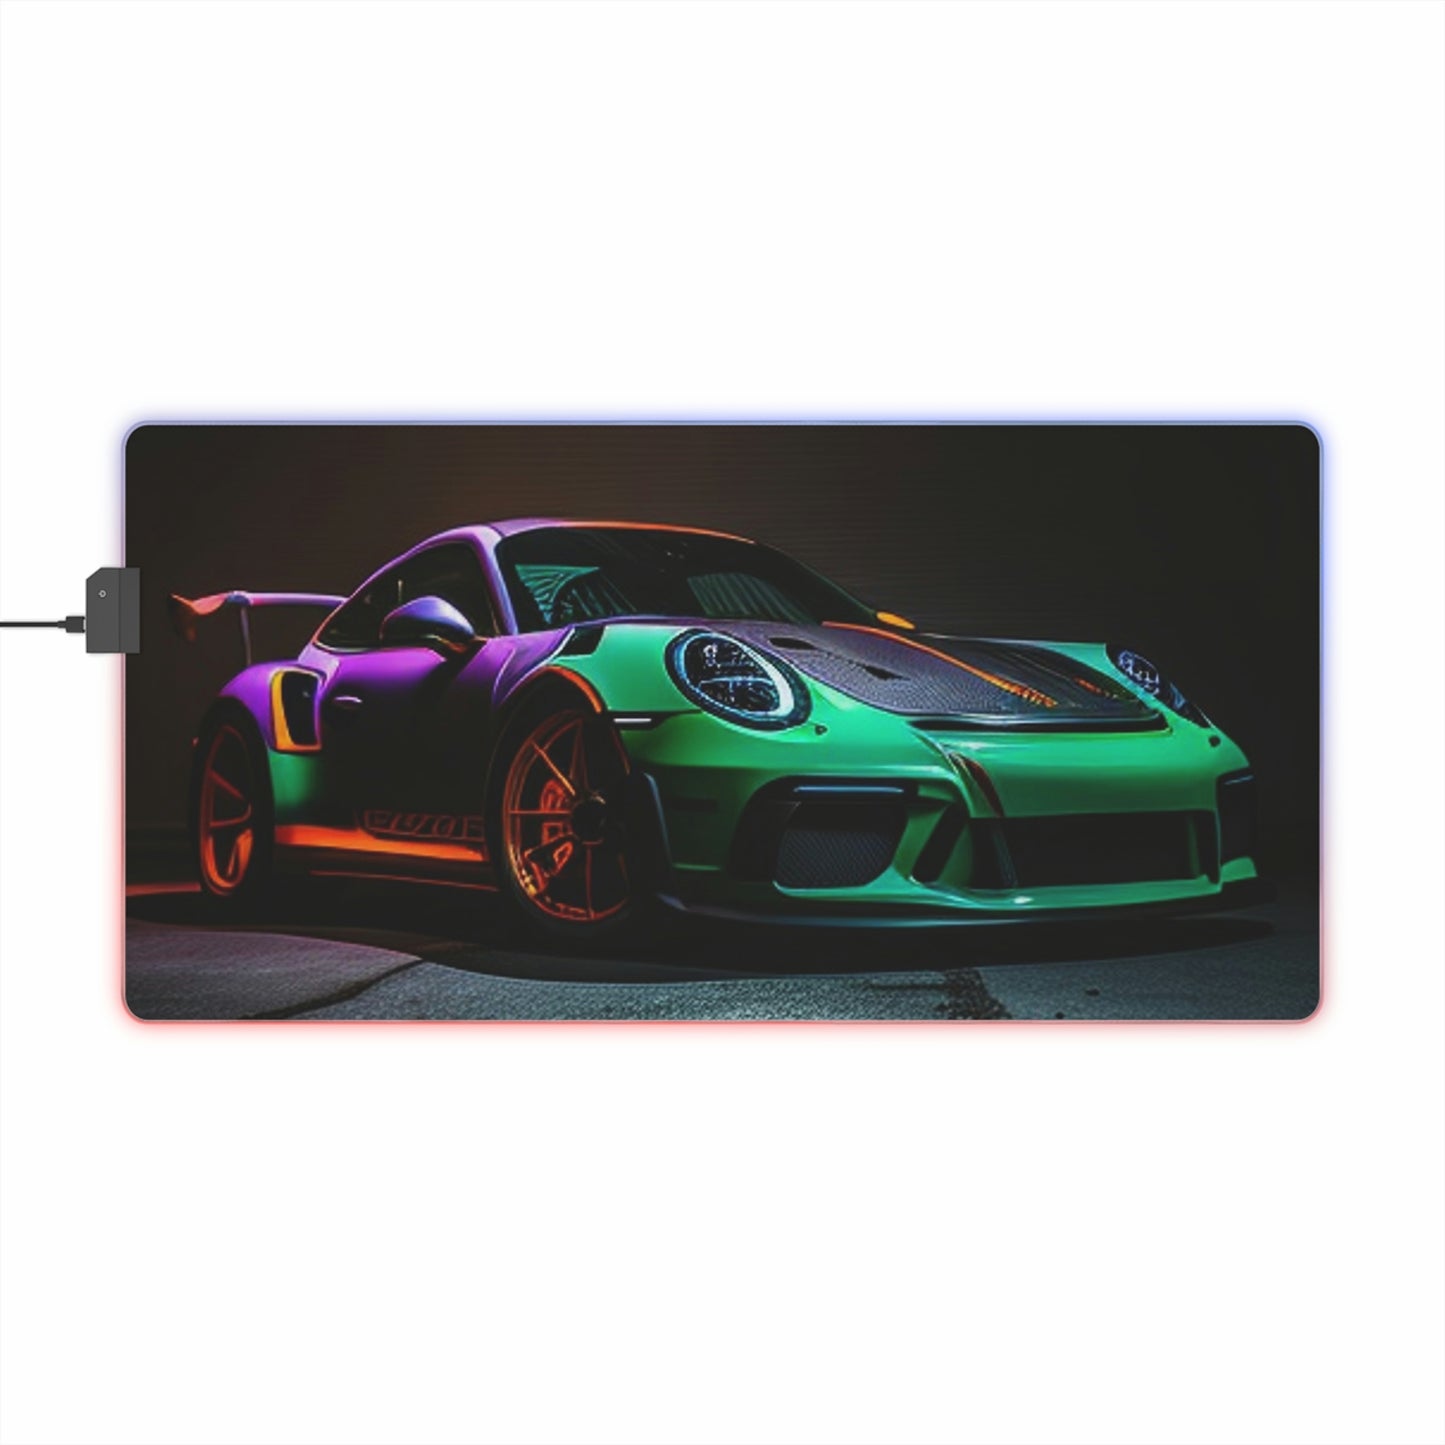 LED Gaming Mouse Pad Green Porsche 911 4